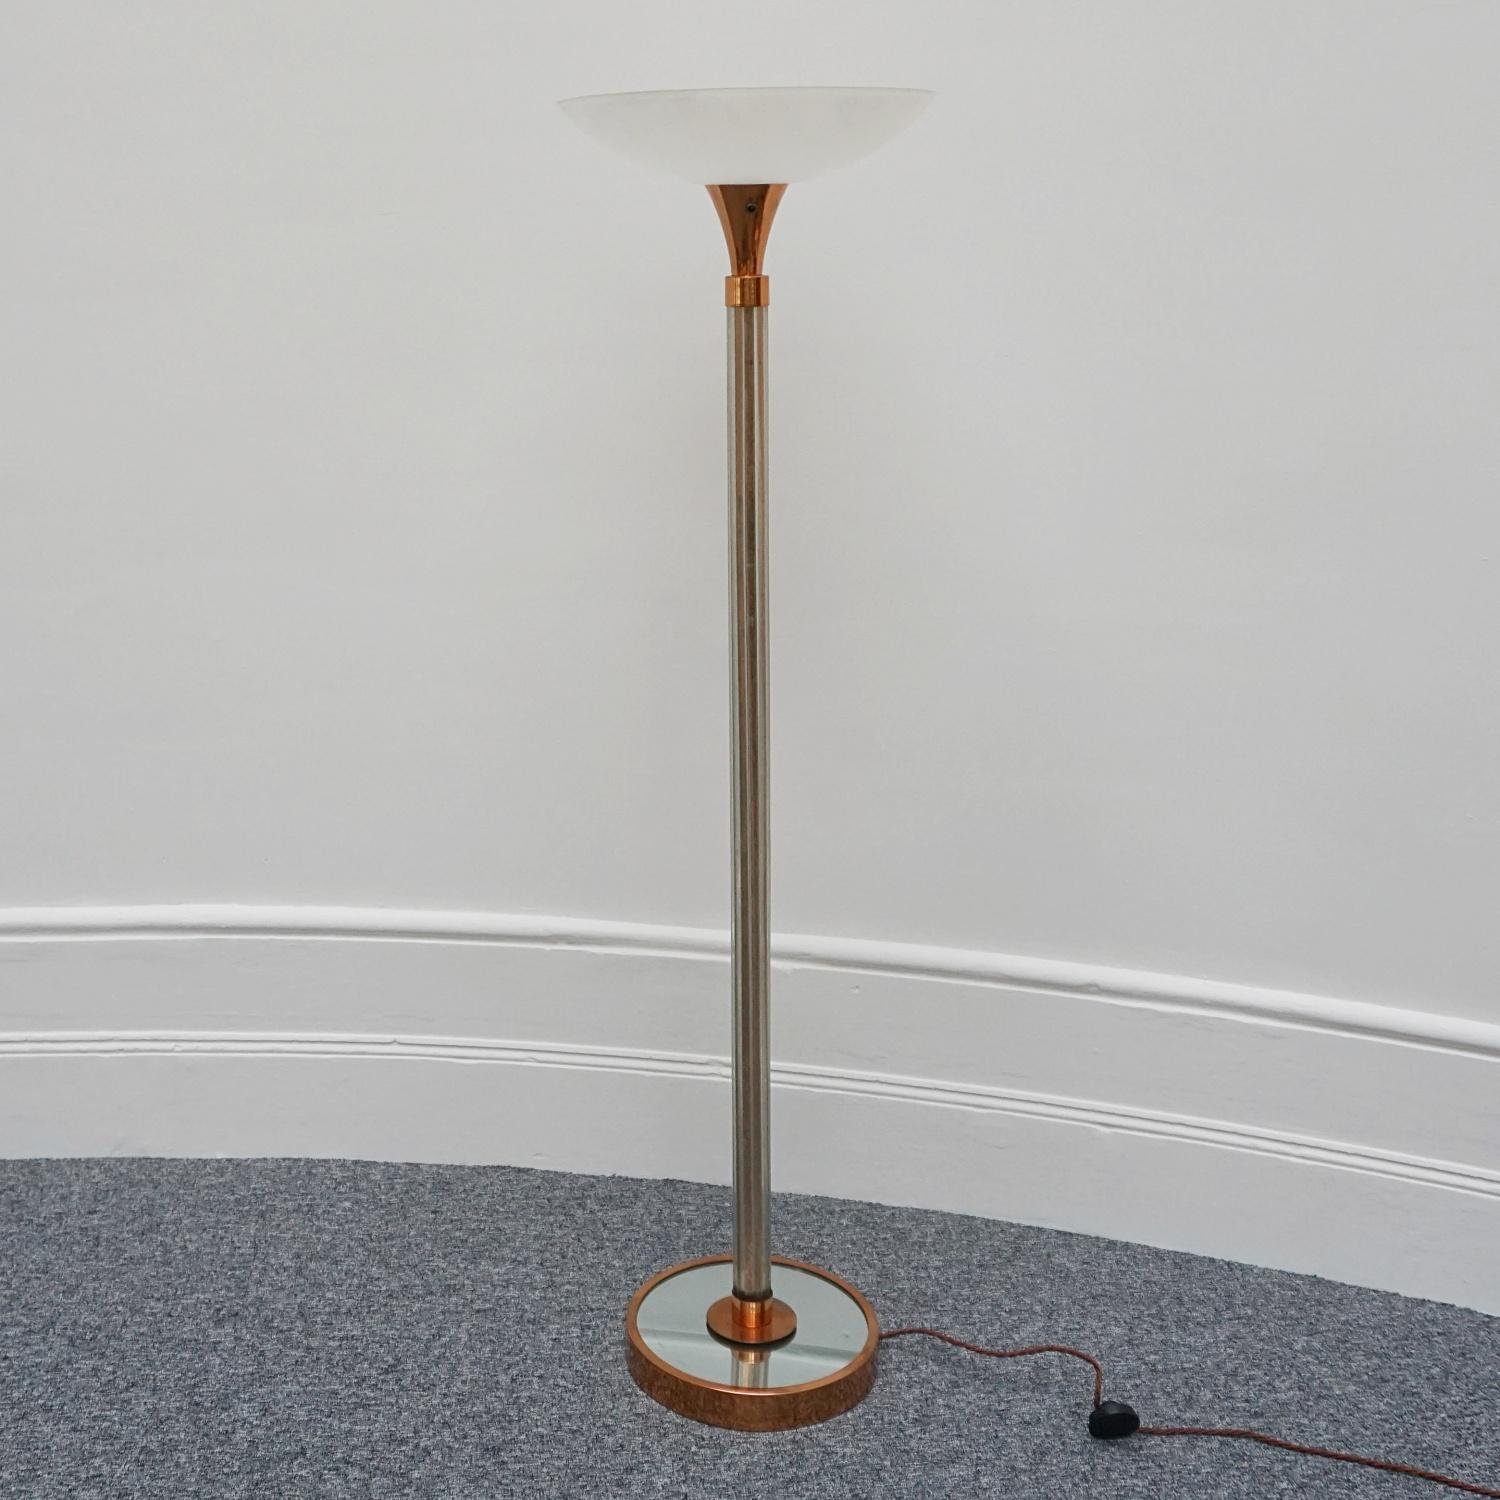 A mid-century uplighter attributed to Heal's of London. Copper base with mirrored glass surround and copper upper stem connected by clustered glass rods. Original plastic shade. 

Dimensions: H 174cm, W 48cm, D 48cm 

Origin: English

Date: